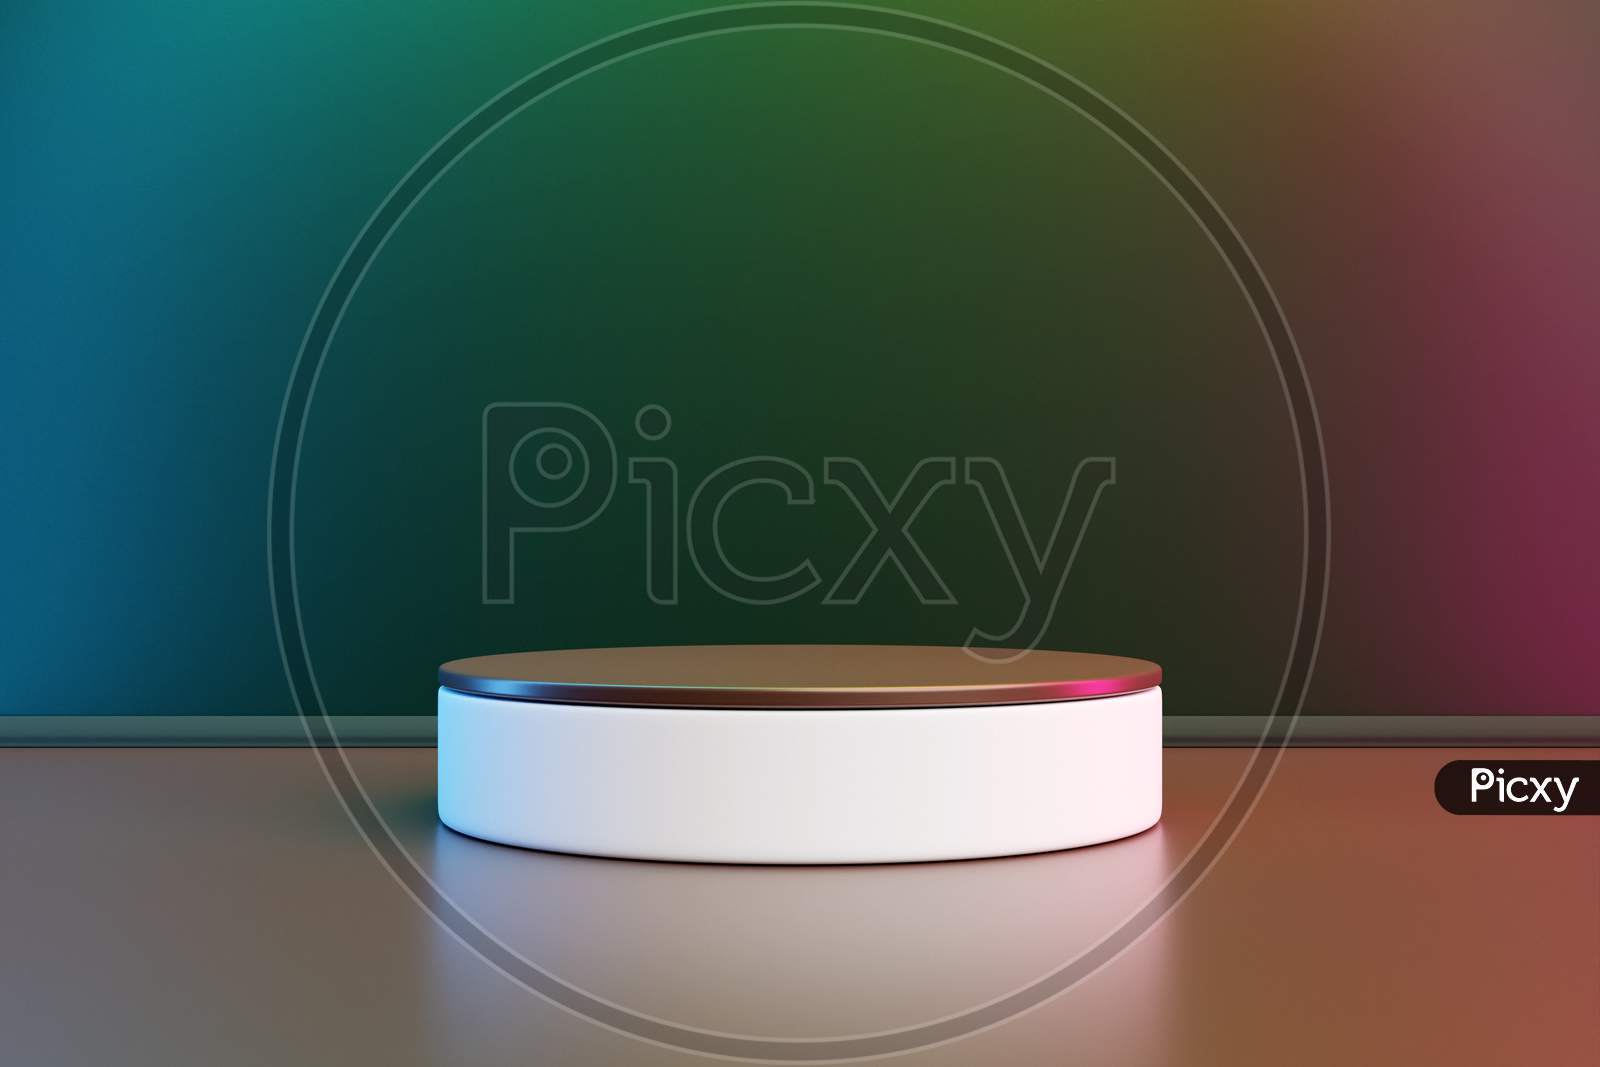 3D Illustration Of A Scene From A Circle On A Green Background. A Close-Up Of A White Round  Pedestal.